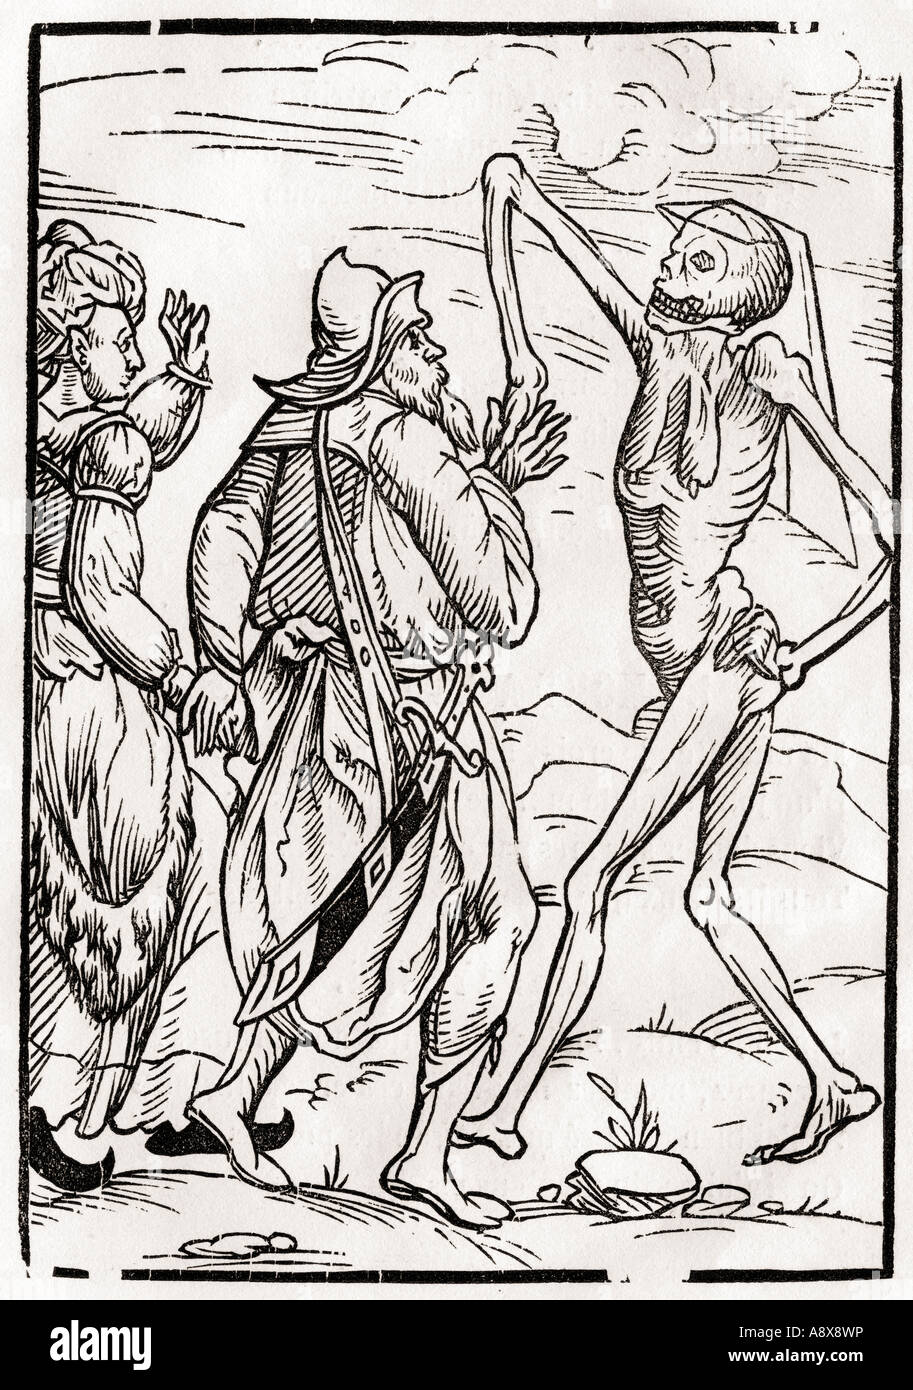 Death comes for the Unbelieving Husband. From Der Todten Tanz or The Dance of Death, published Basel, 1843. Stock Photo